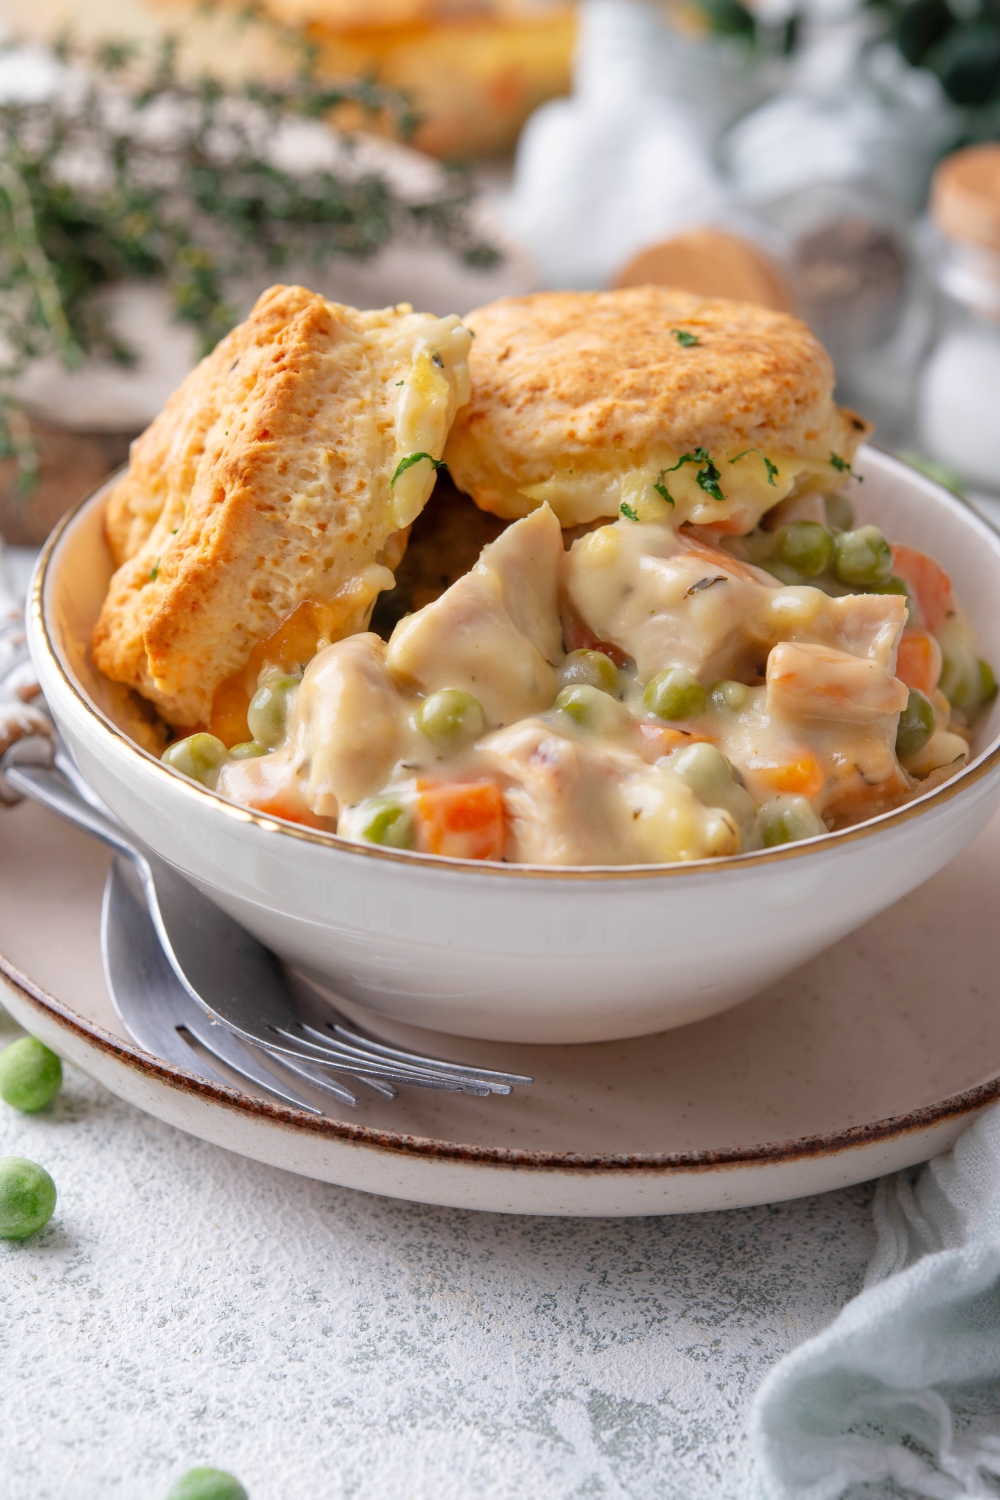 Turkey pot pie and two biscuits in a bowl on top of a plate.